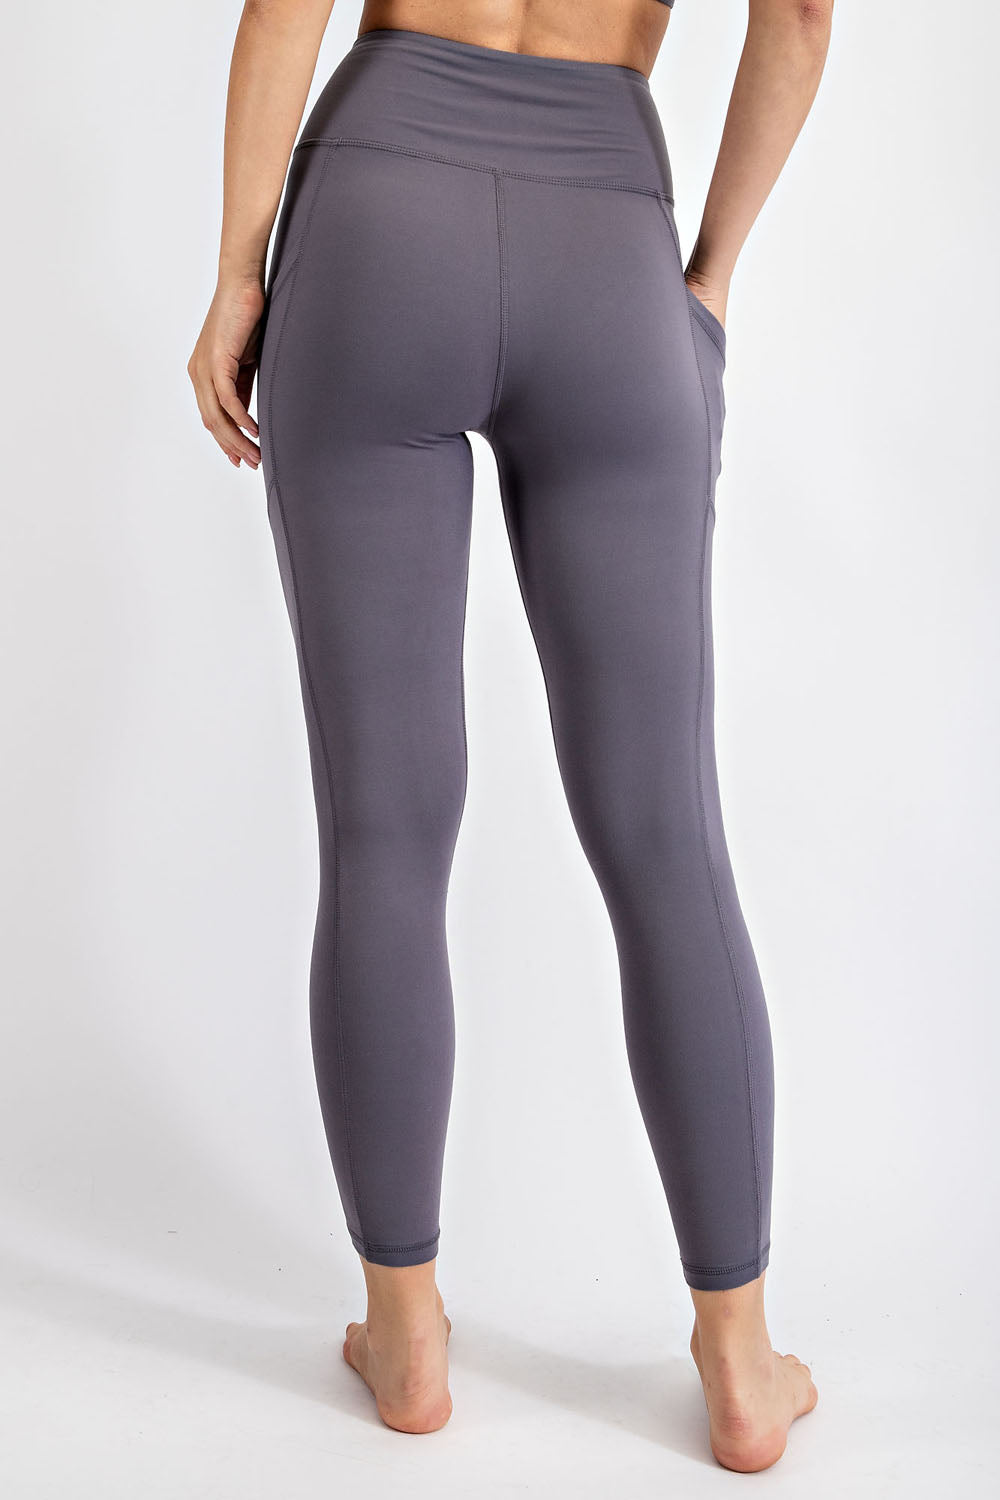 KOR Fitness - Pro Seamless Leggings with Pockets